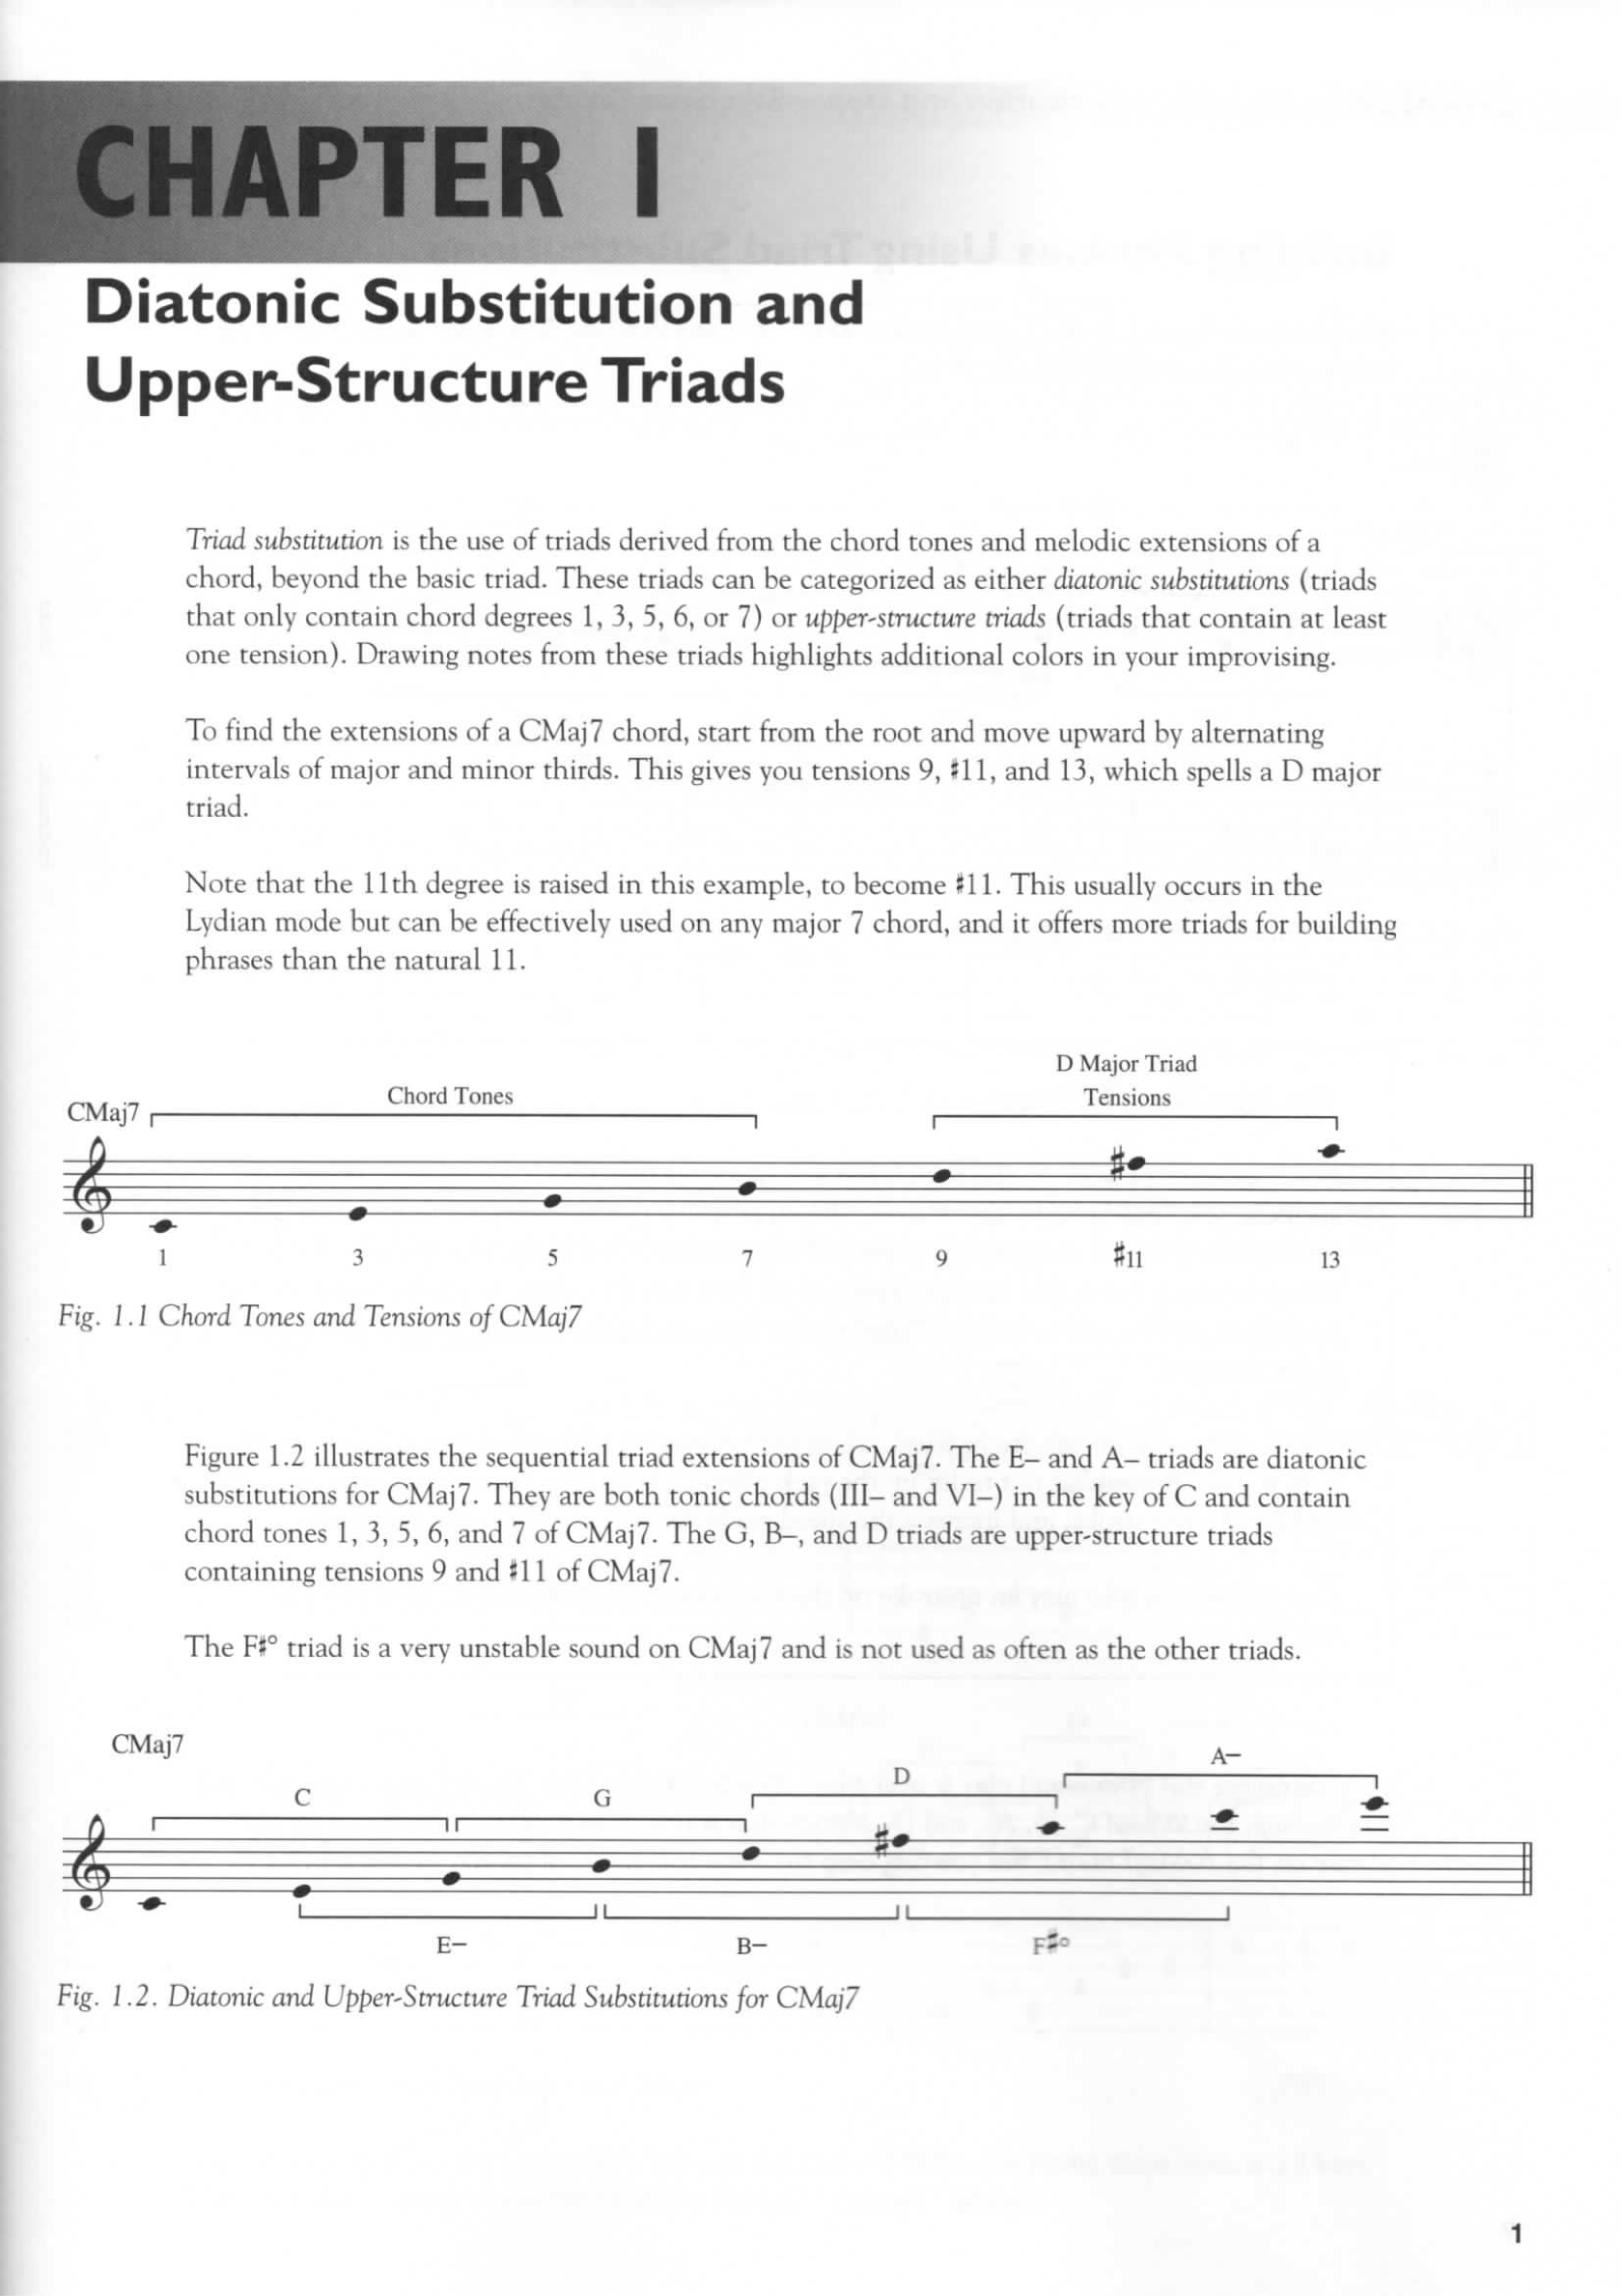 Chapter 1 - Diatonic Substitution and Upper Structure Triads - photo 9